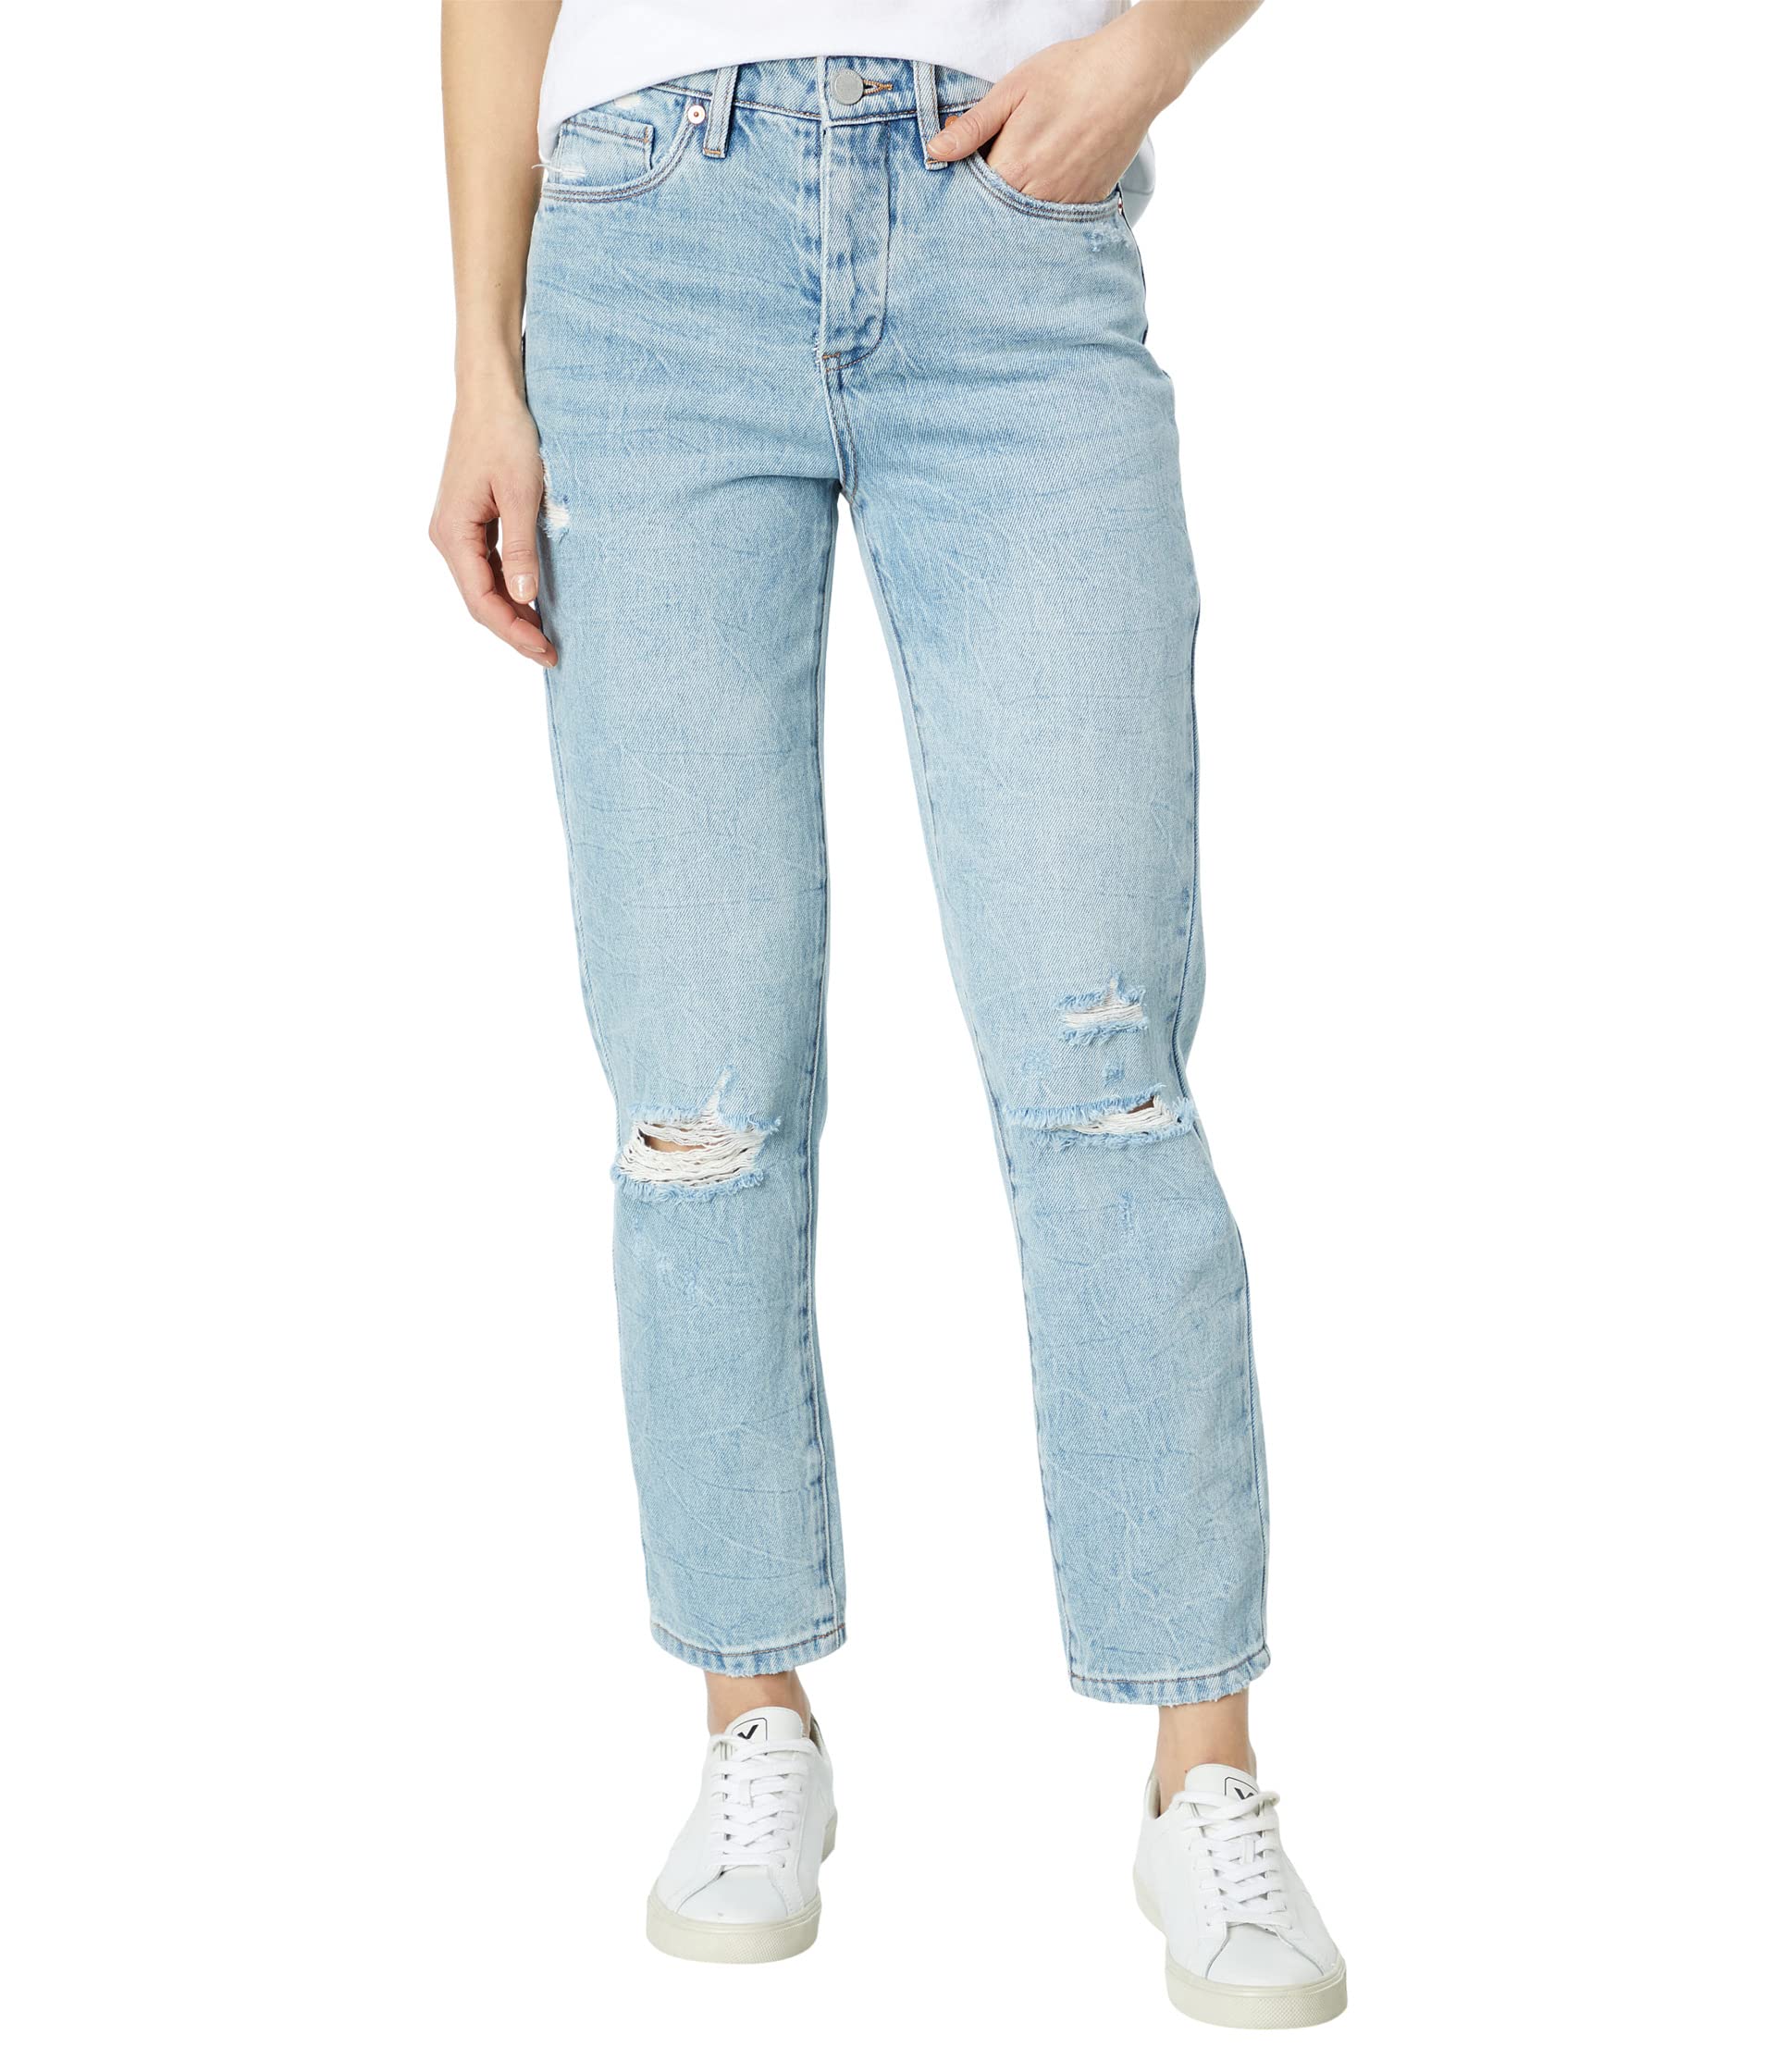 Джинсы Blank NYC, Lightwash Madison Crop High-Rise Five-Pocket Jeans with Rips in Got My Ways